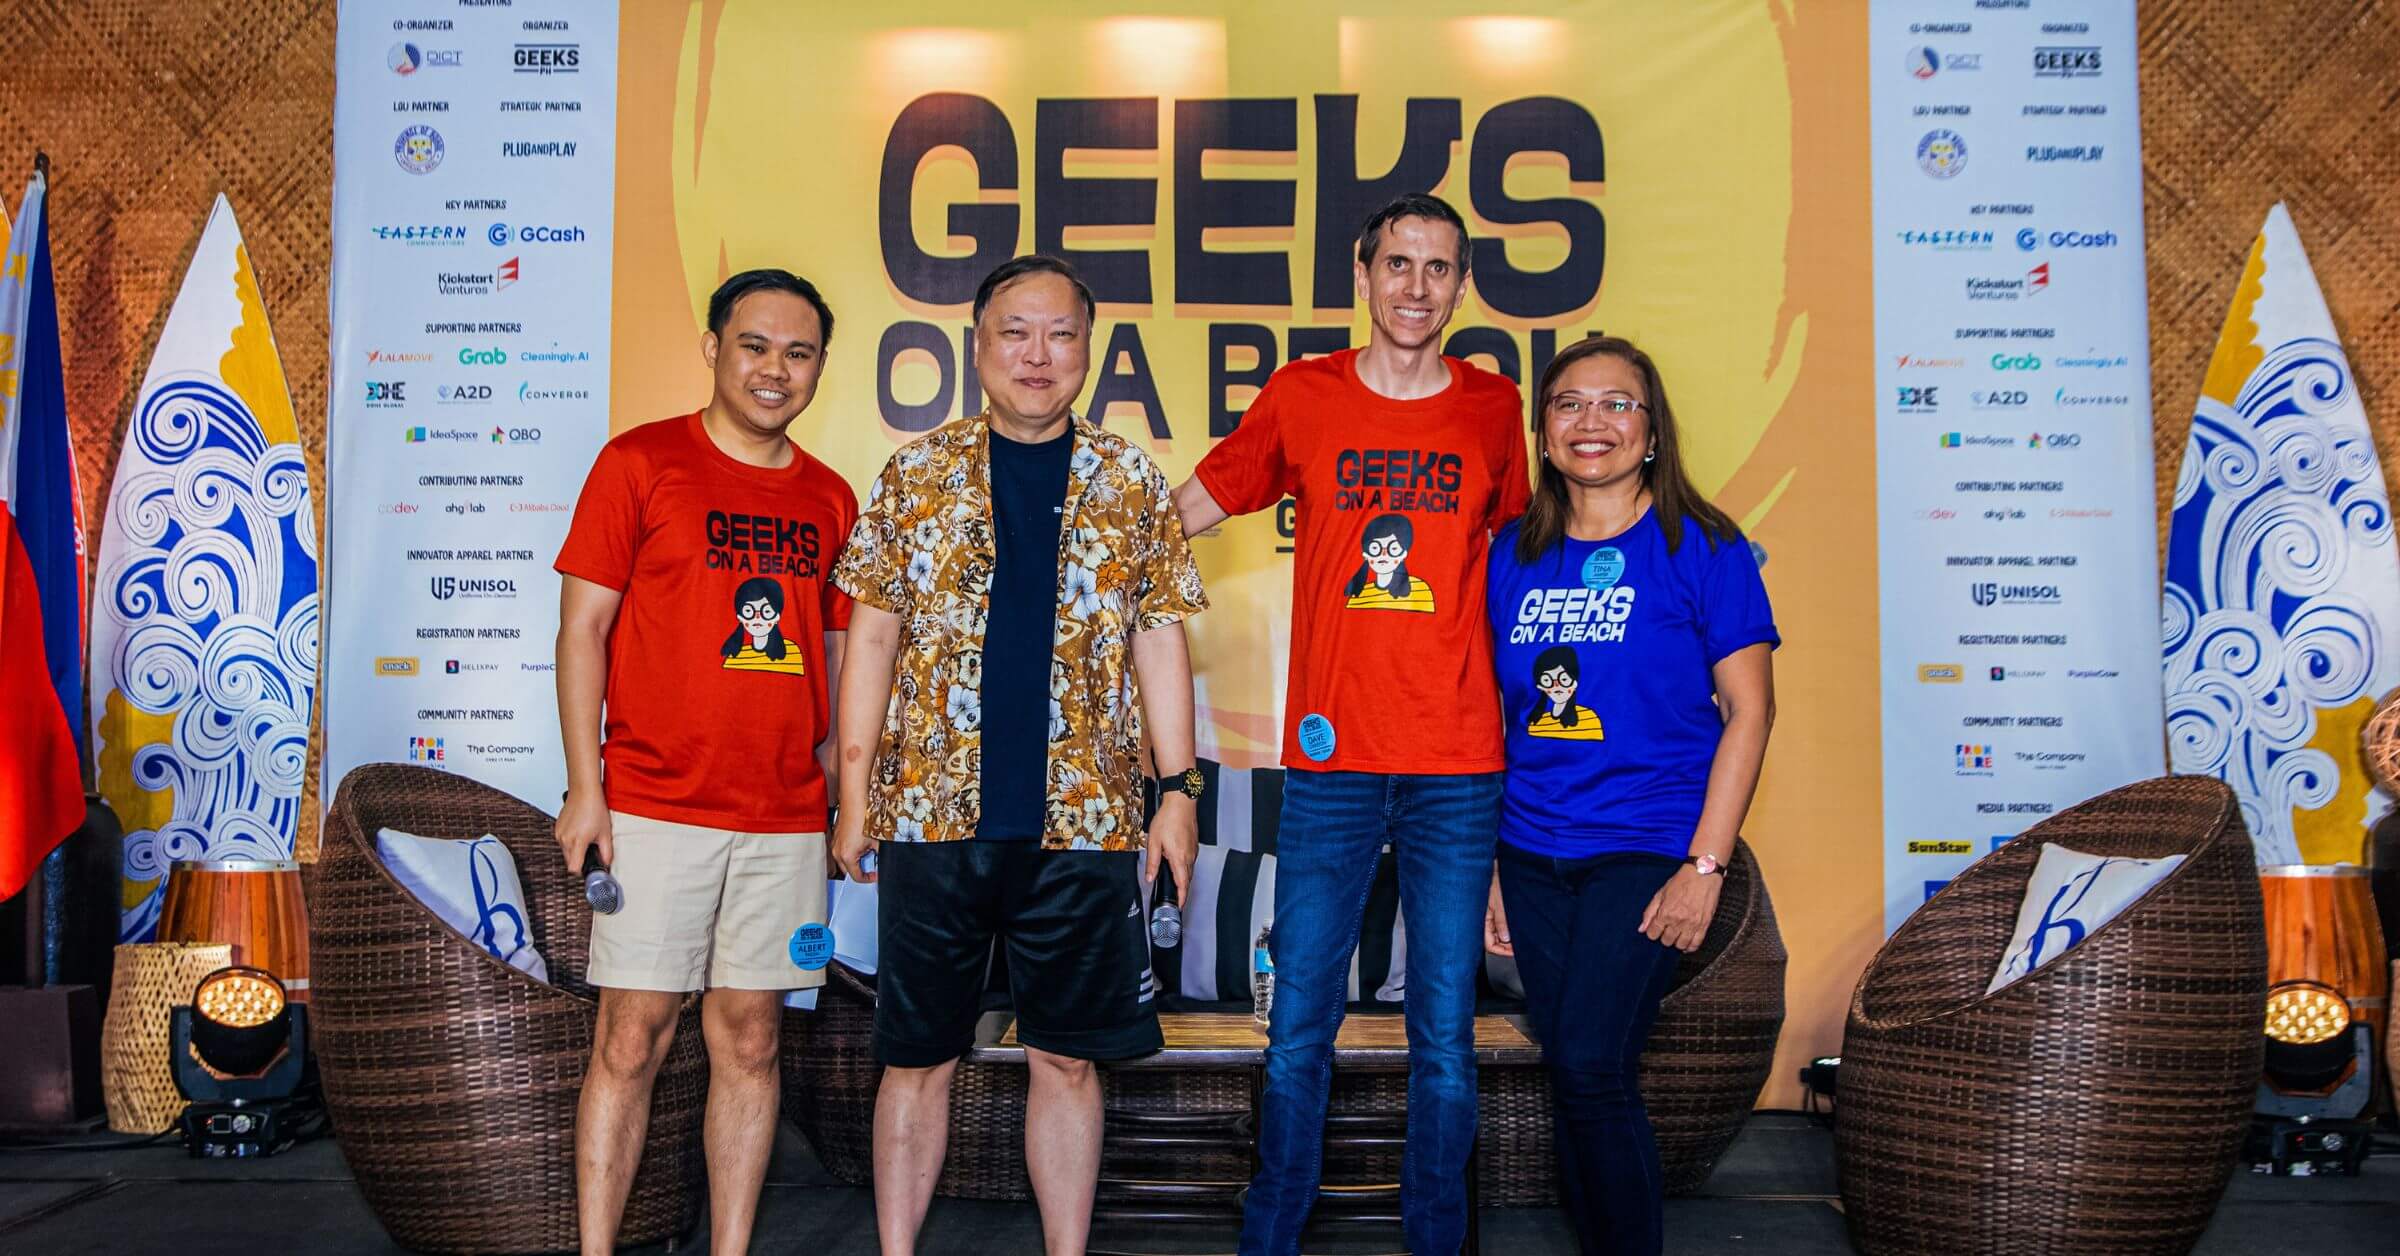 DICT Secretary Ivan John Uy (2nd from left) with Geeks on a Beach organizers (from left) Albert Padin, Dave Overton, and Tina Amper.